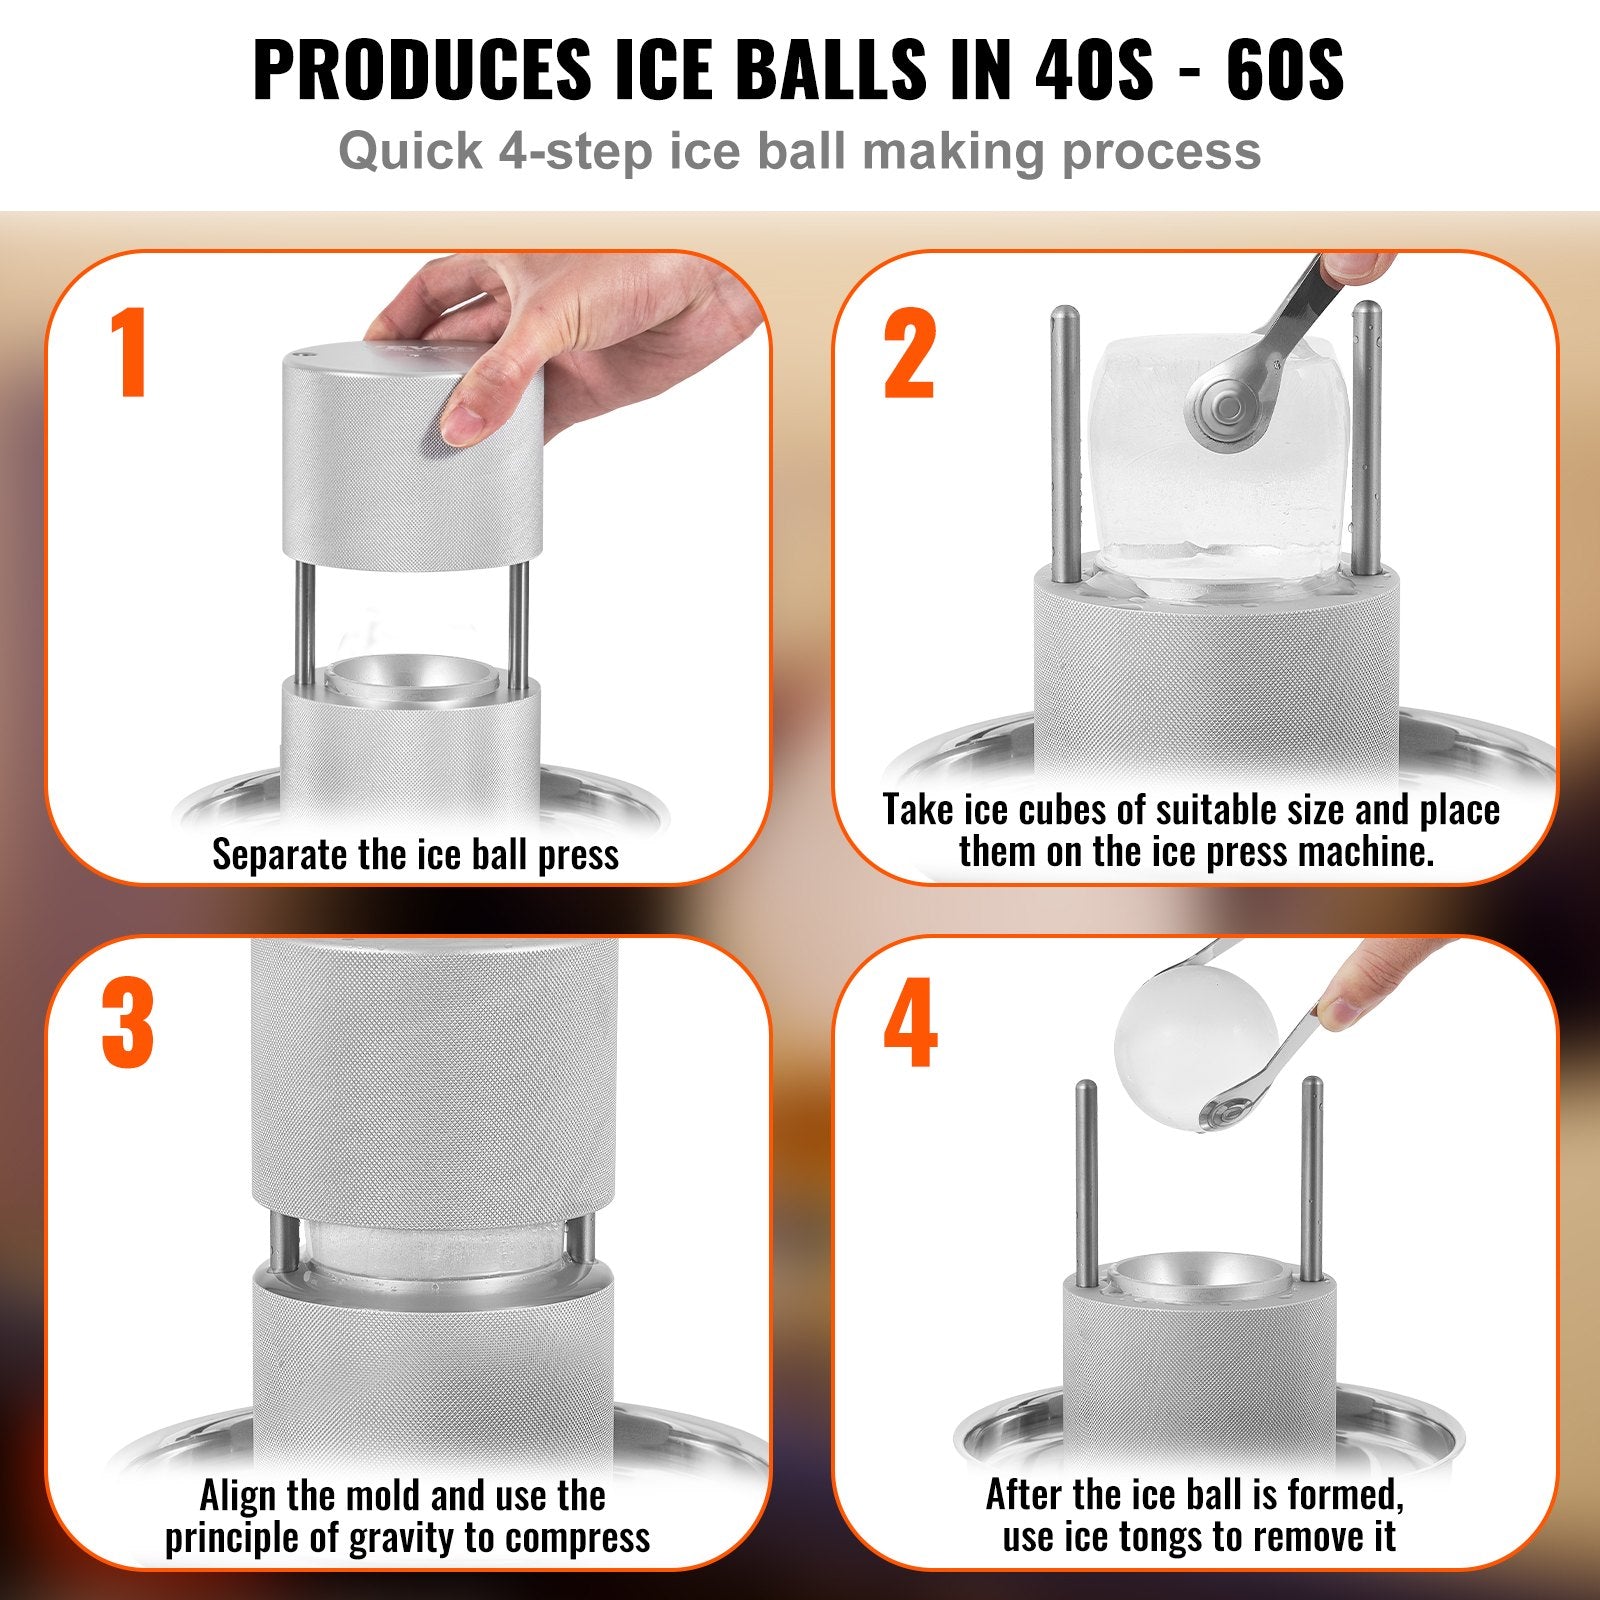 VEVOR Ice Ball Press, 2.4" Ice Ball Maker, Aircraft Al Alloy Ice Ball Press Kit for 60mm Ice Sphere, Ice Press with Tong and Drip Tray, for Whiskey, Cocktail, Bourbon, Scot on Party & Holiday, Silver-1